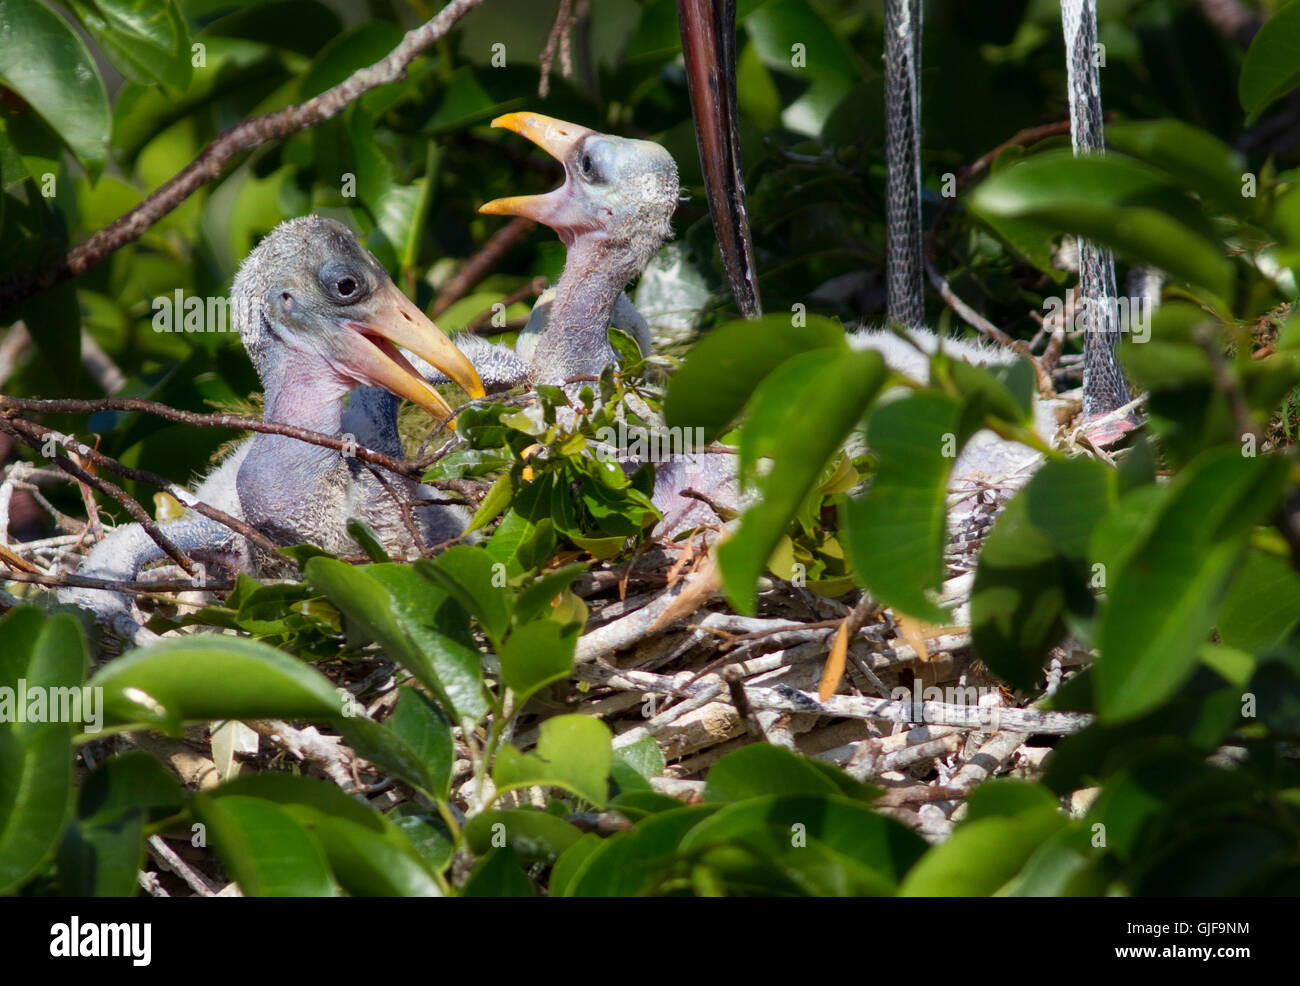 Young nestling wood storks look cute in their nest with their parent's bill nearby....feeding time is near. Stock Photo